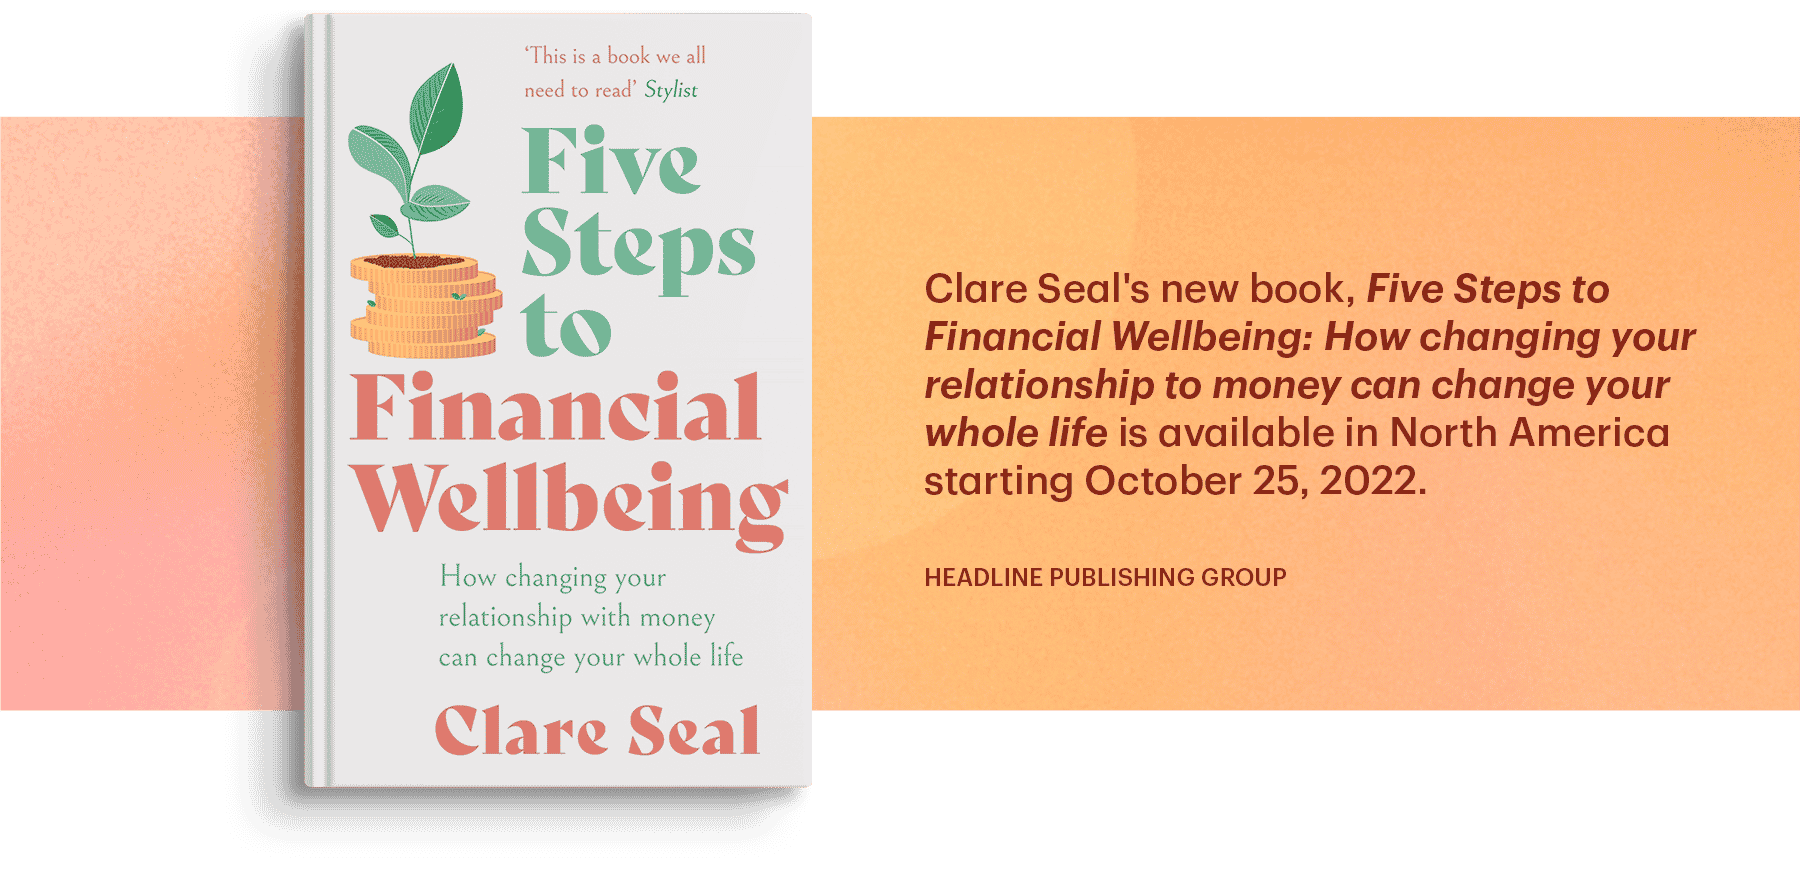 Clare Seal's new book, Five Steps to Financial Wellbeing: How changing your relationship to money can change your whole life is available in North America starting October 25, 2022 (headline publishing group)